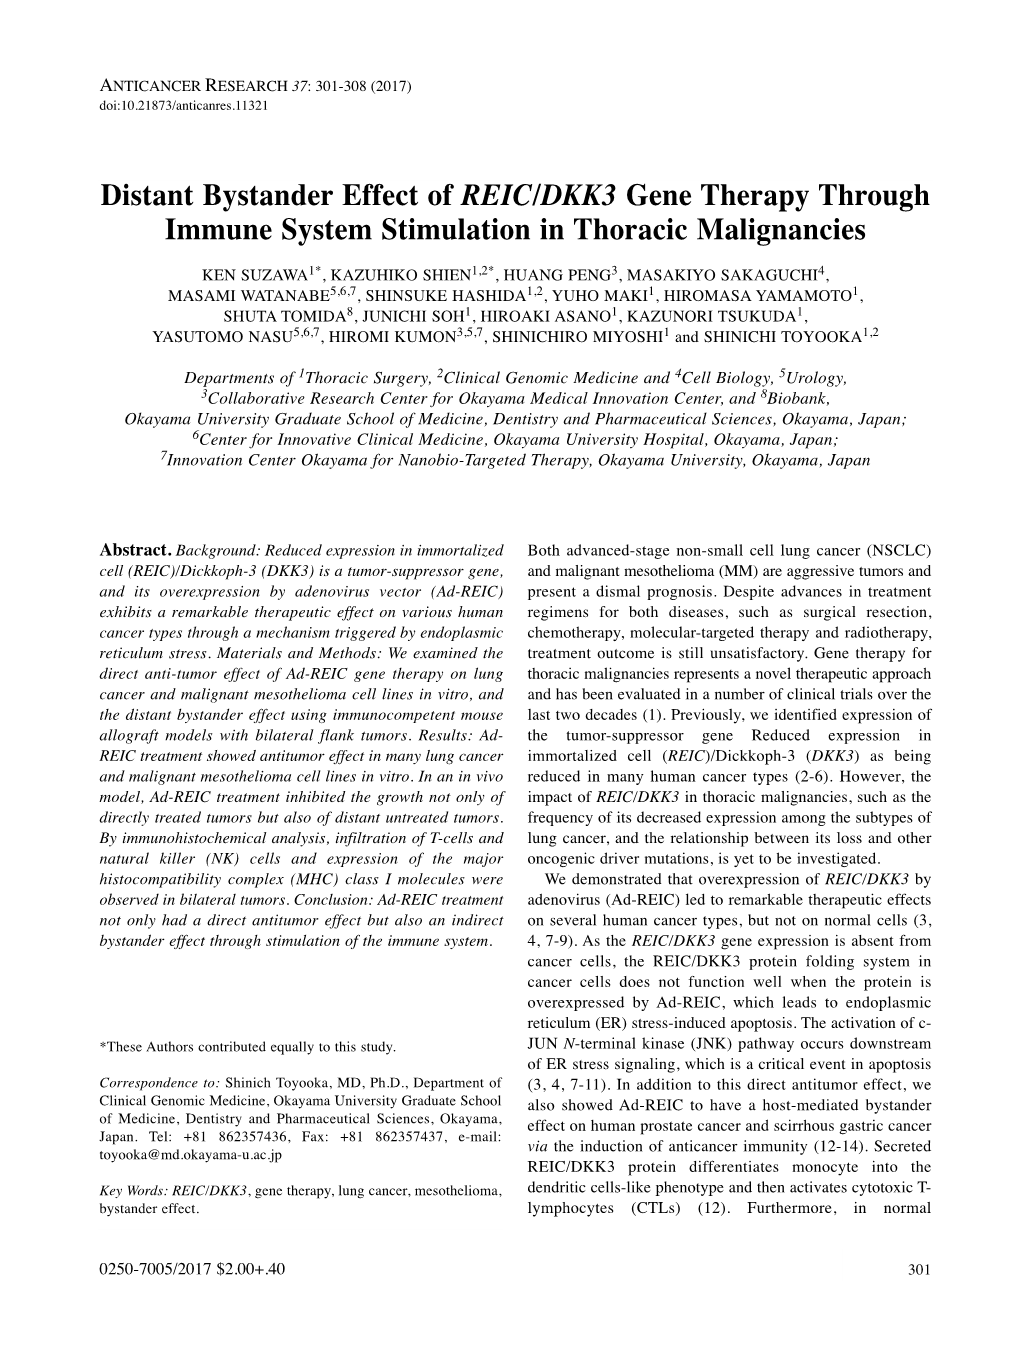 Distant Bystander Effect of REIC/DKK3 Gene Therapy Through Immune System Stimulation in Thoracic Malignancies